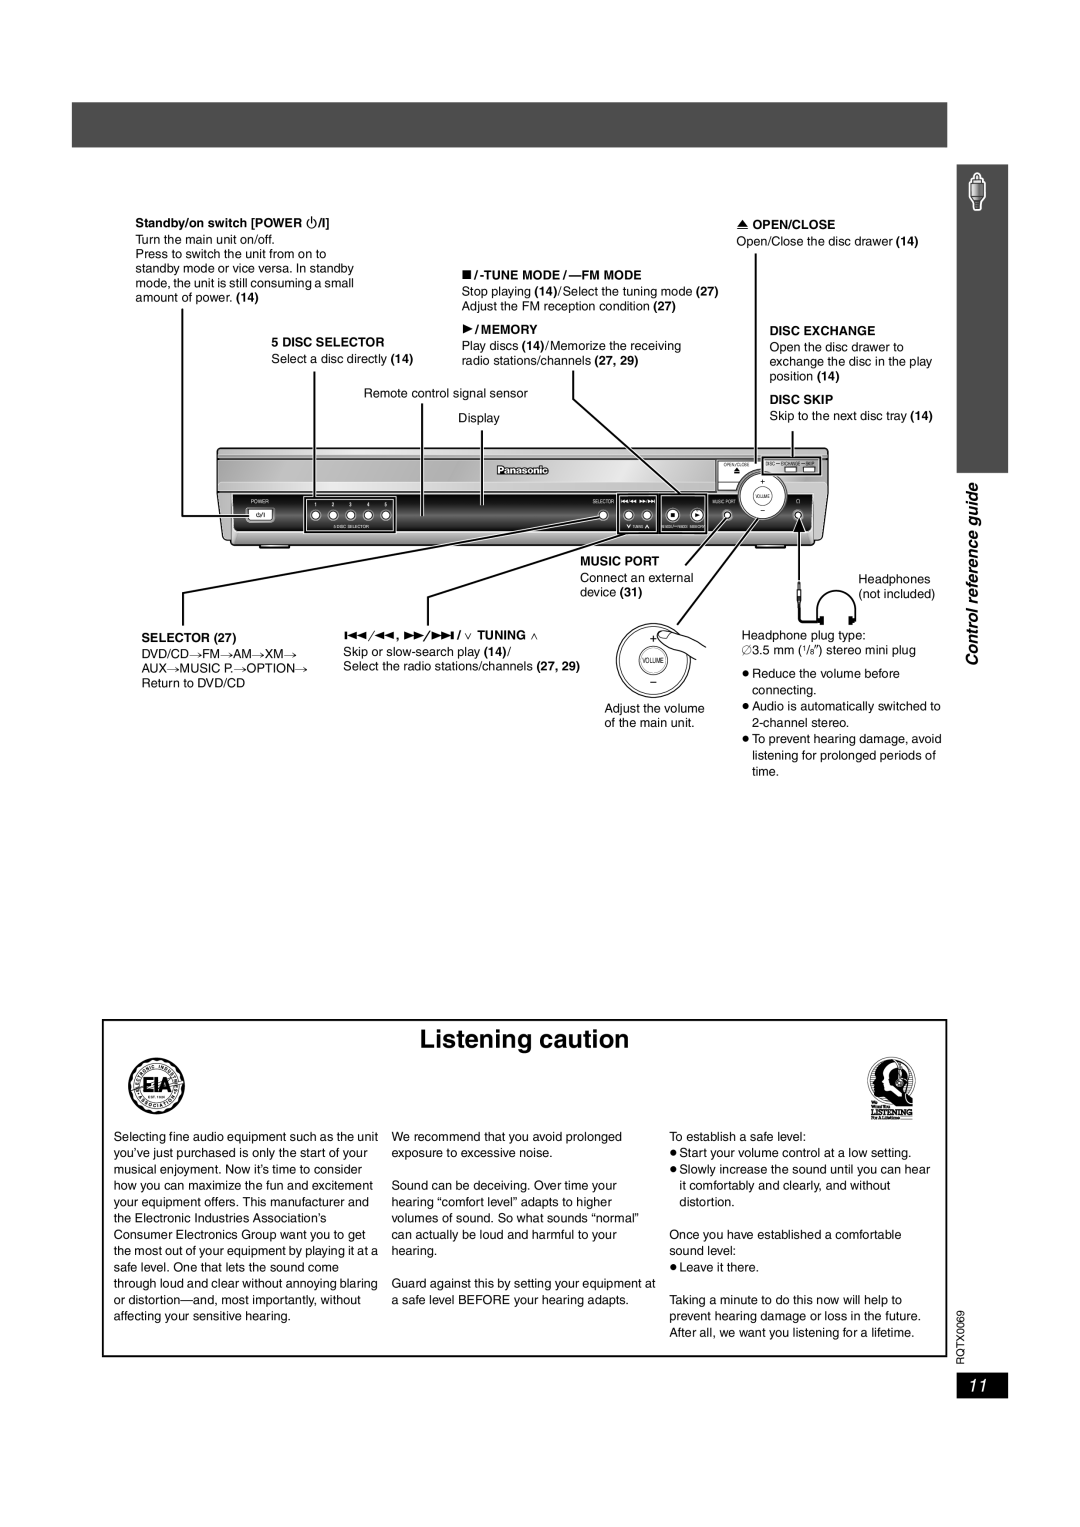 Panasonic SC-PT650 operating instructions Listening caution, Control reference guide 